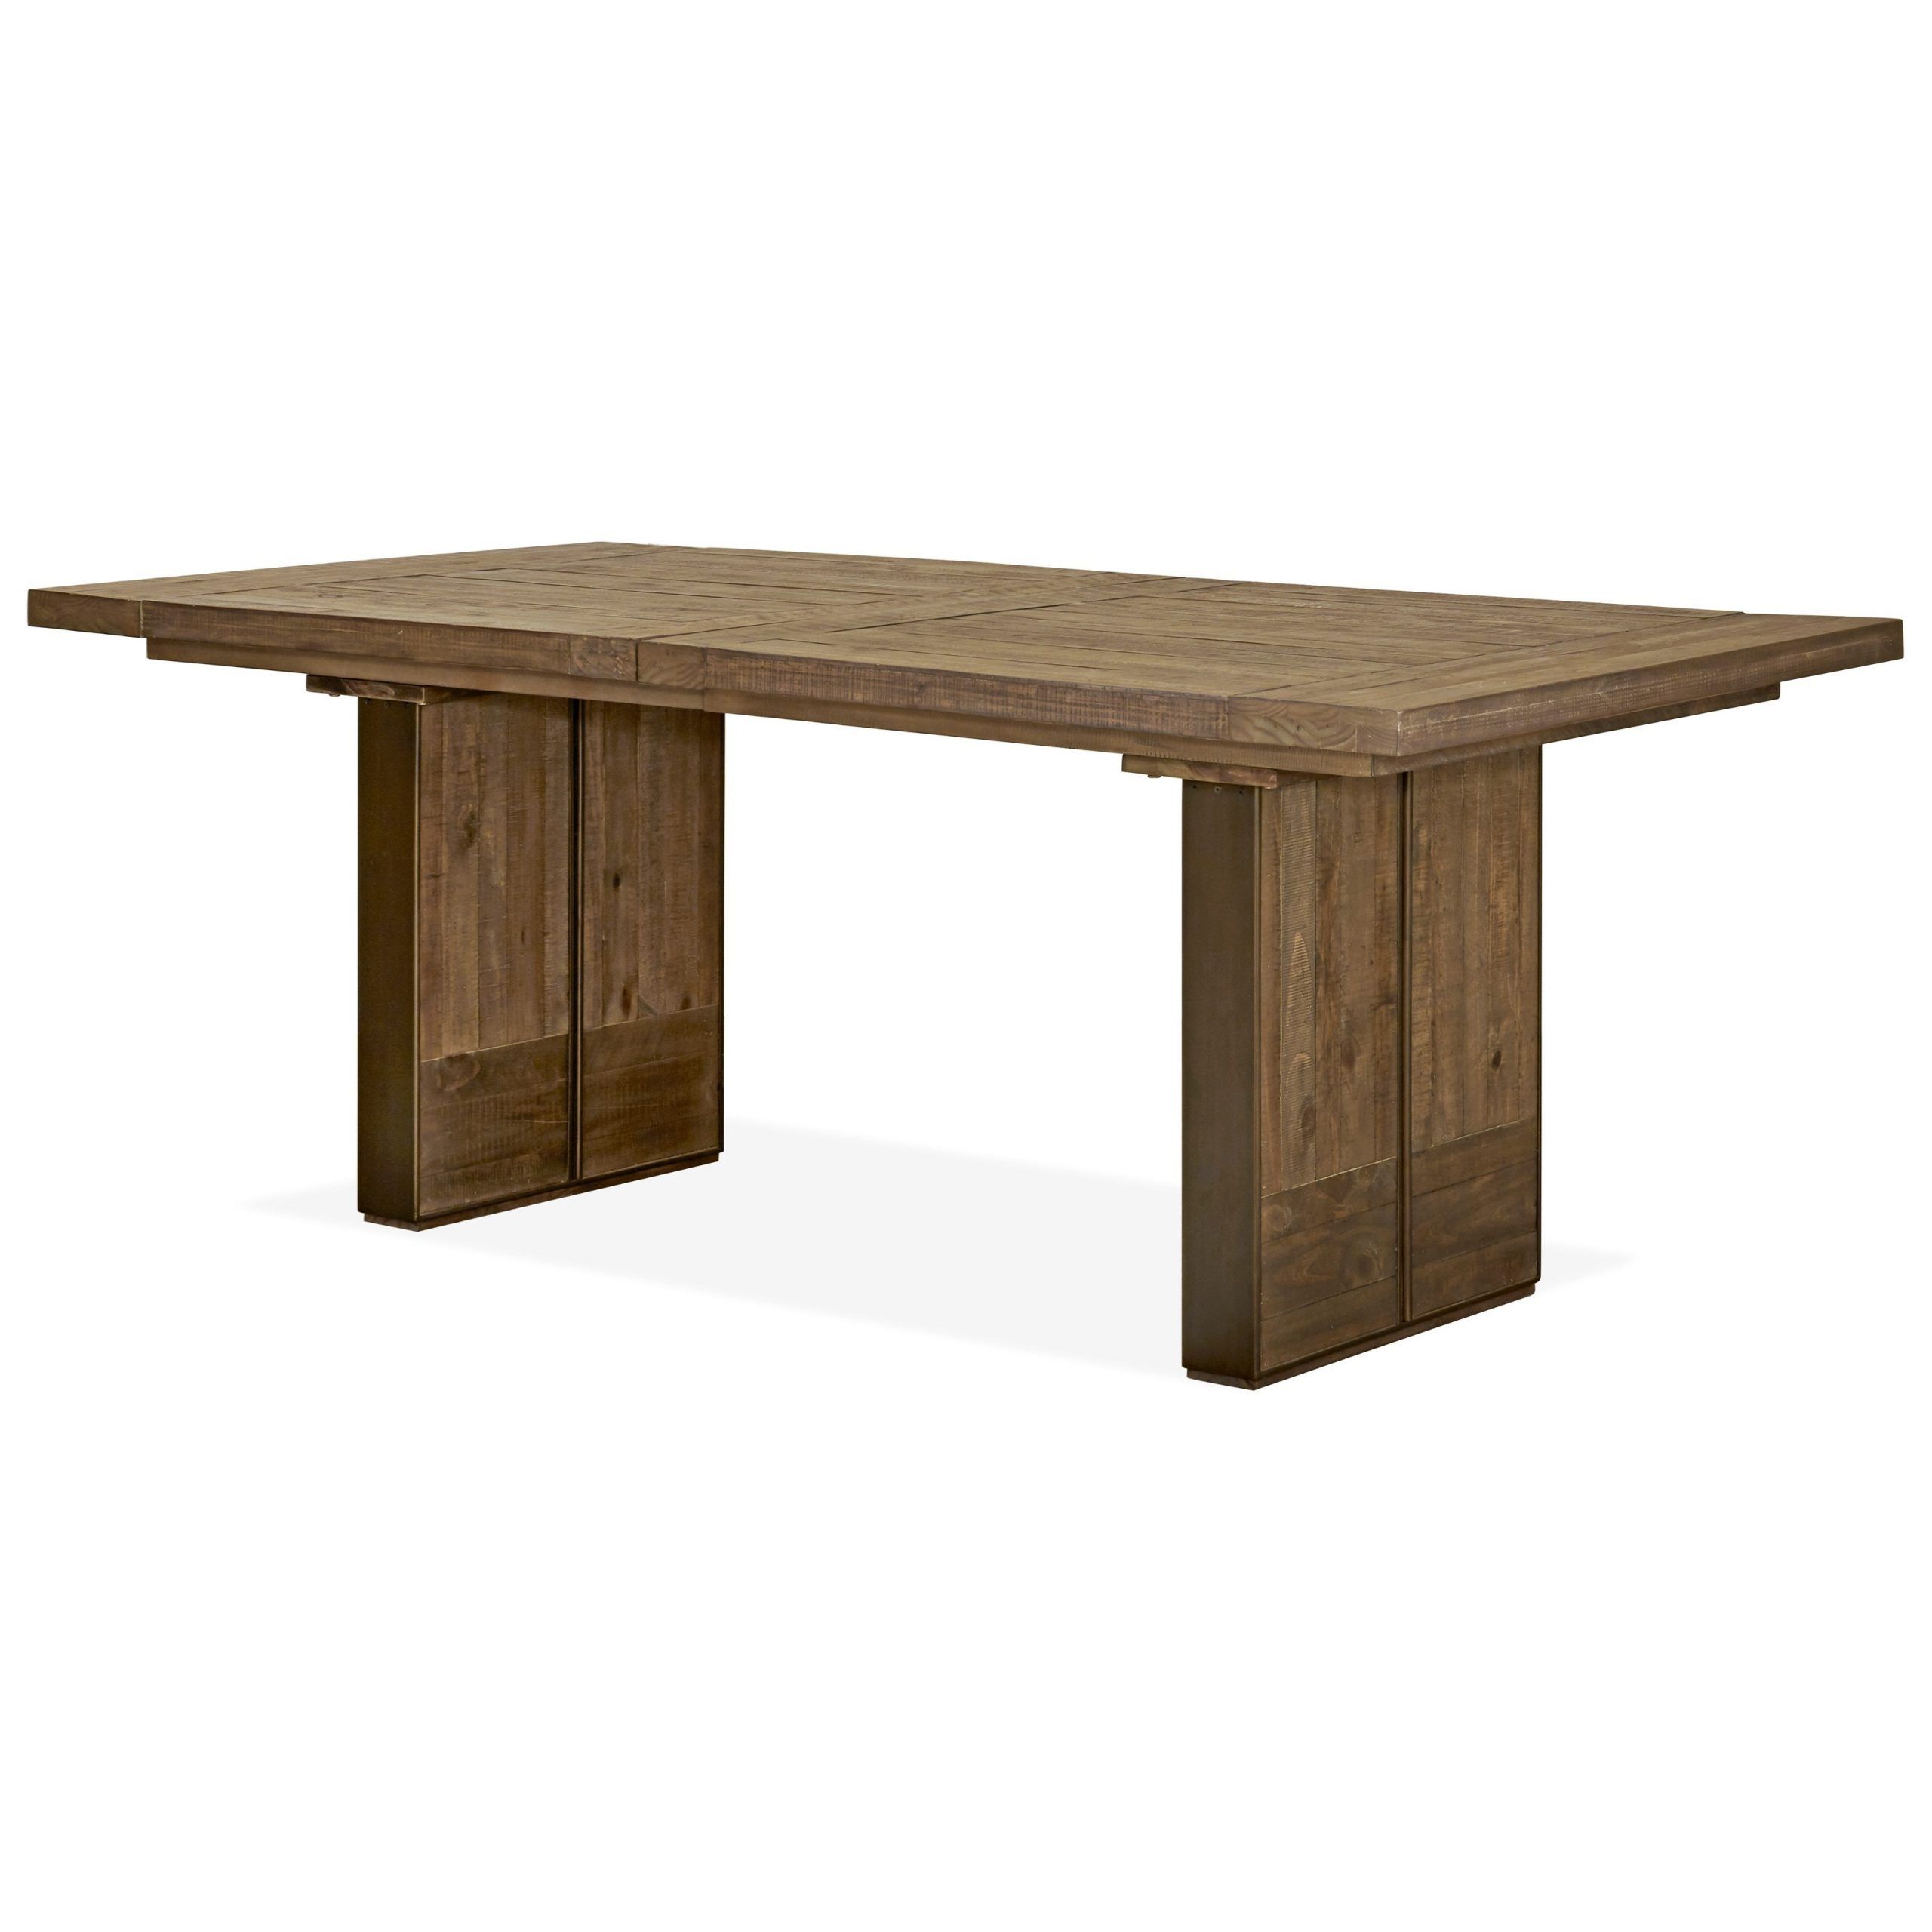 Current Wood Kitchen Dining Tables With Removable Center Leaf With Contemporary Rustic Rectangular Dining Table With Center Leaf (View 23 of 25)